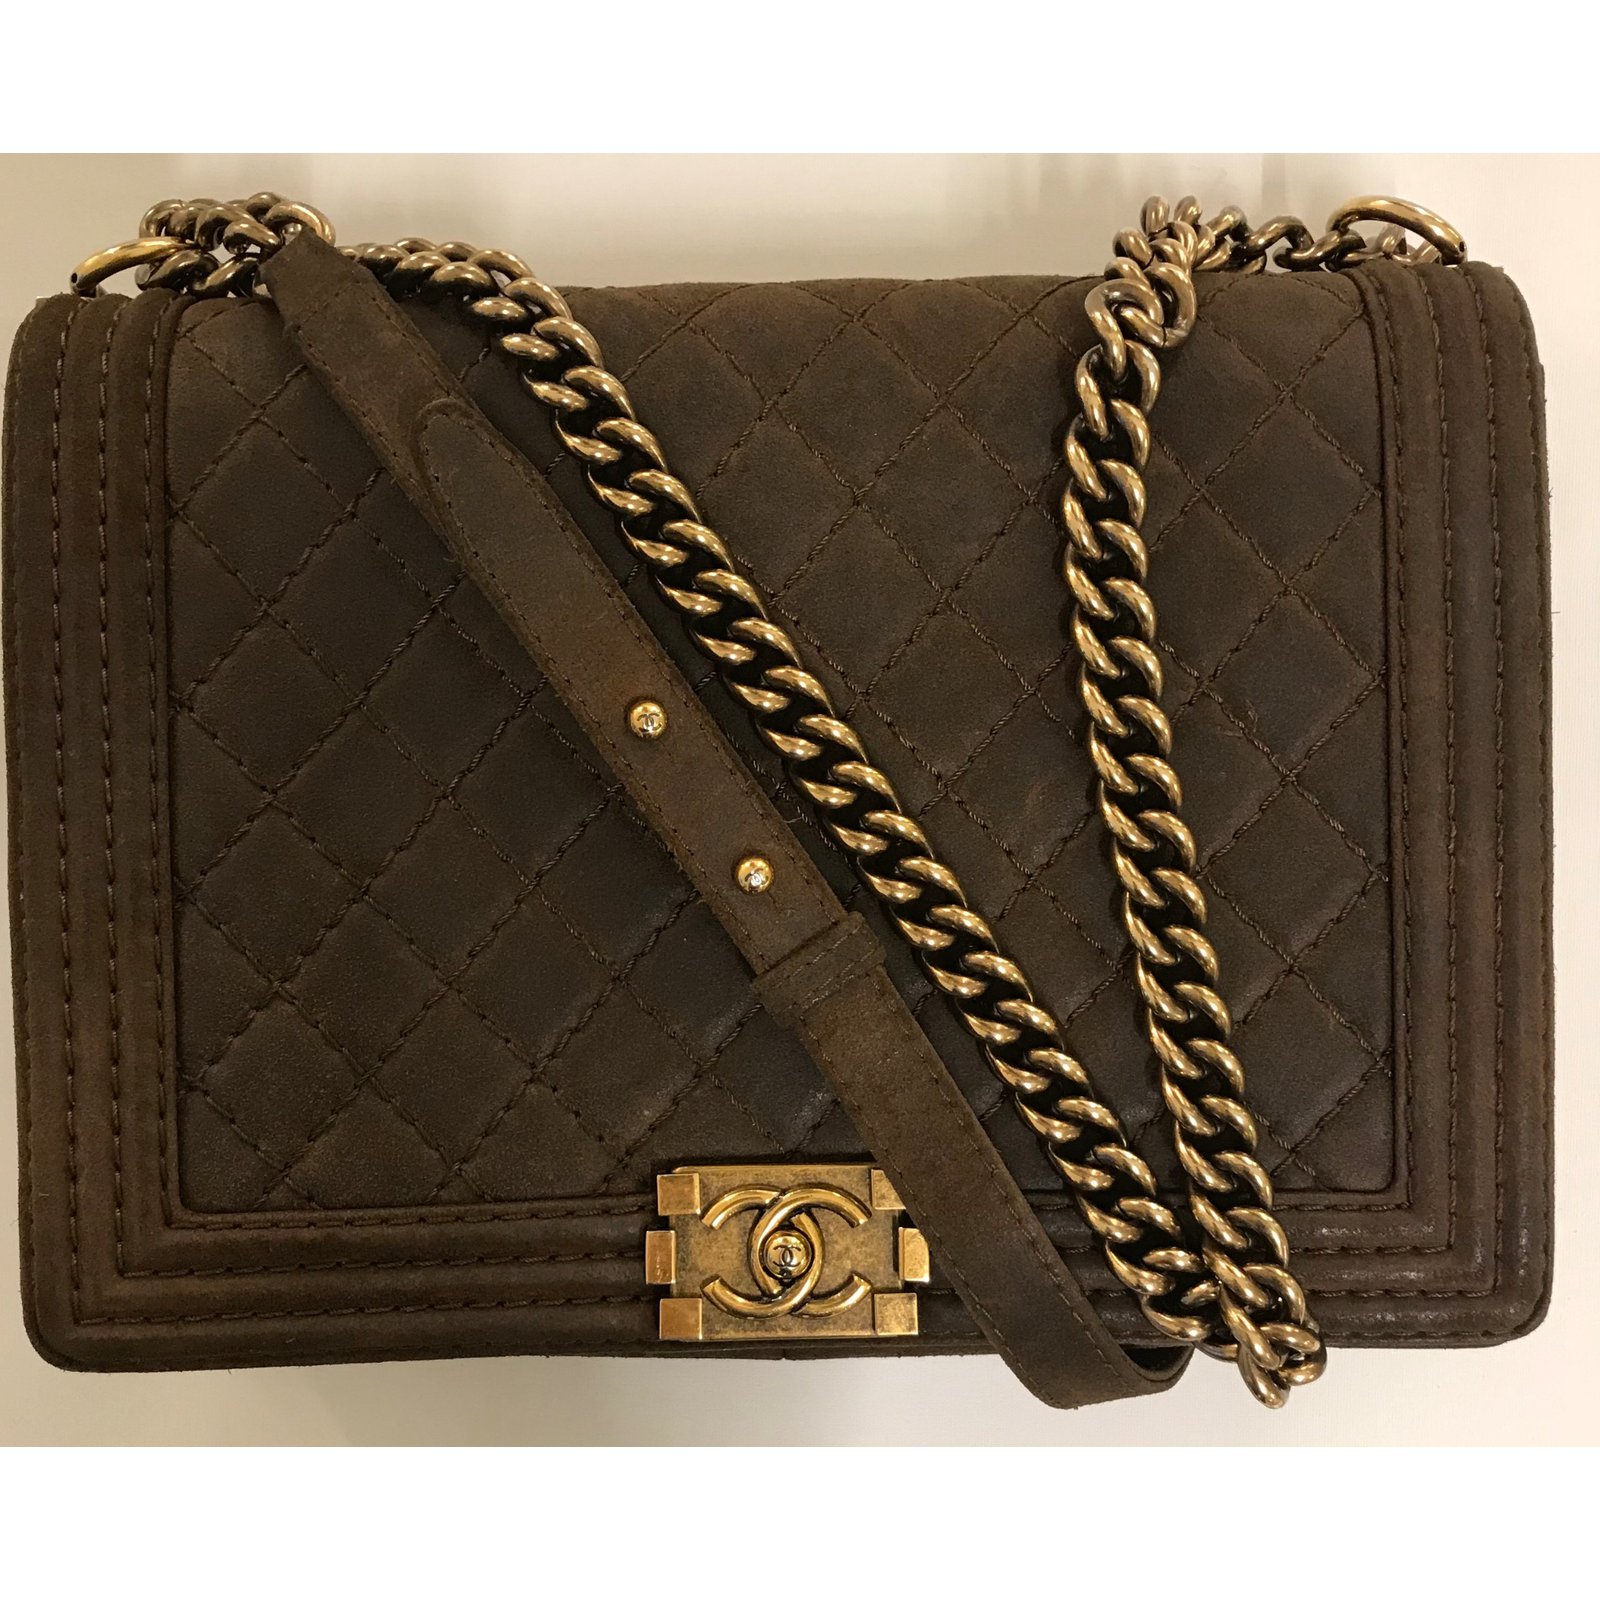 Distressed brown Chanel Boy Large Bag from Pre-Fall 2013